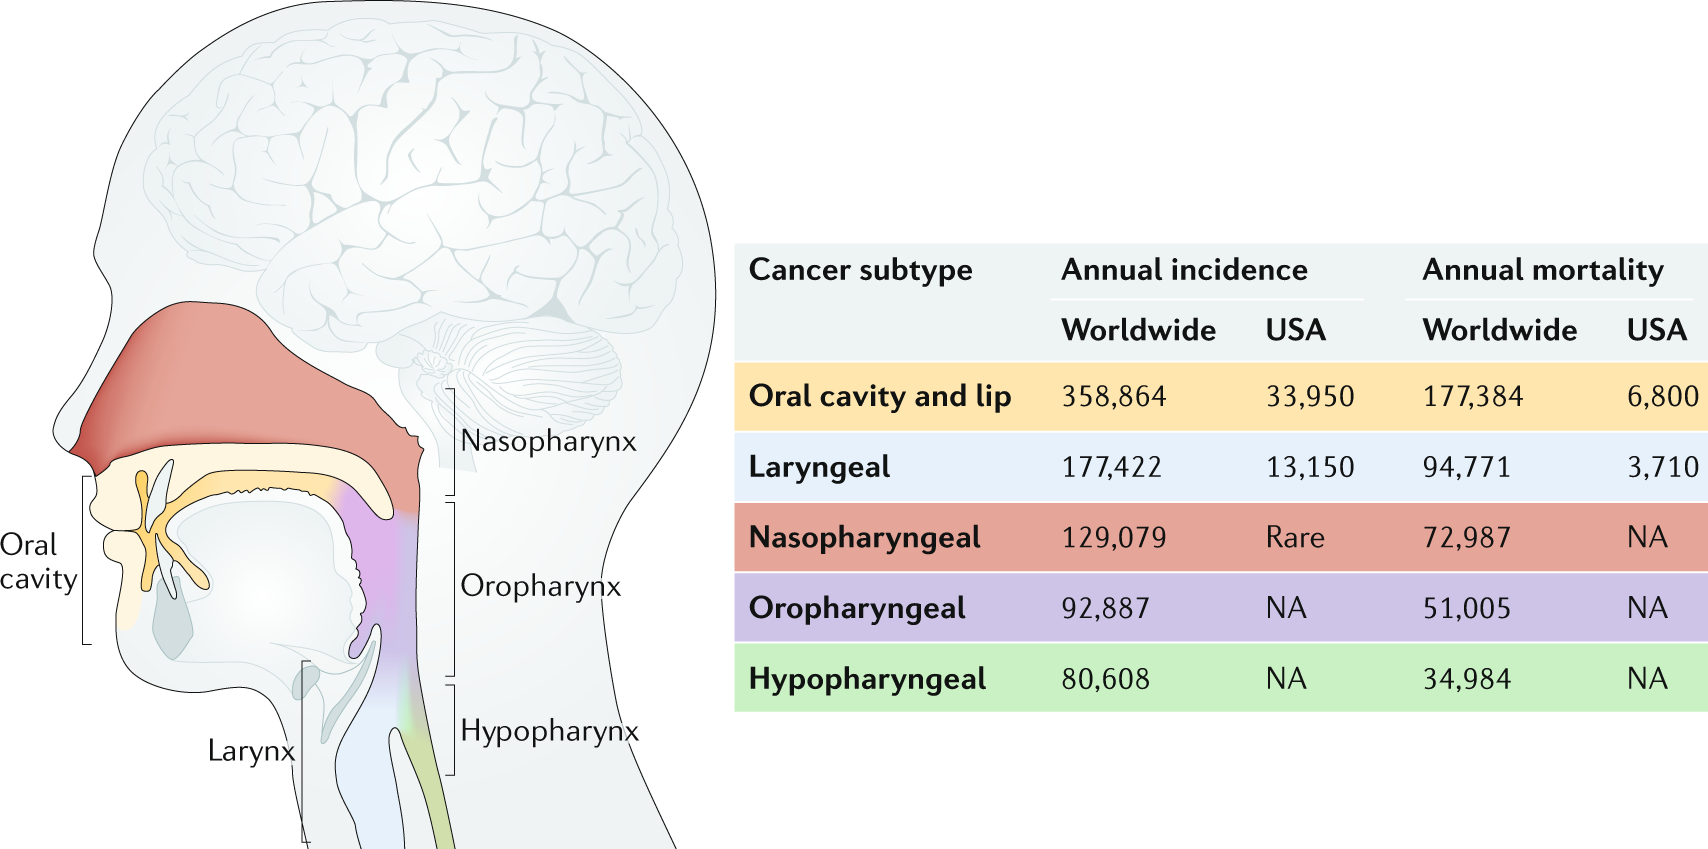 Hpv and head and neck cancer review - Hpv and cancer review